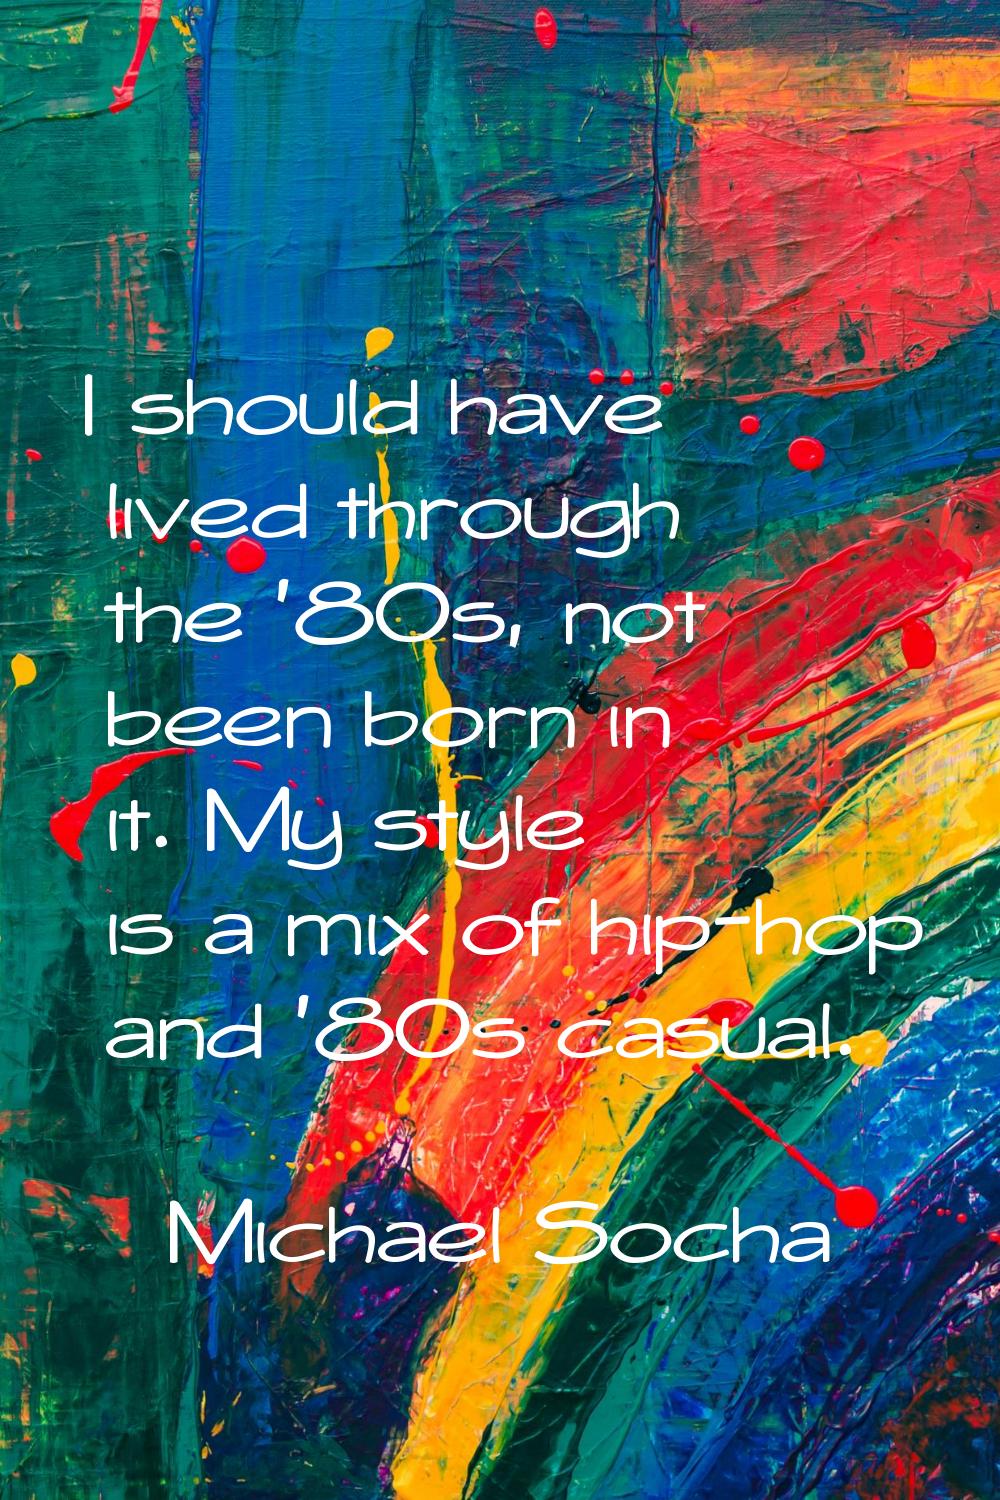 I should have lived through the '80s, not been born in it. My style is a mix of hip-hop and '80s ca